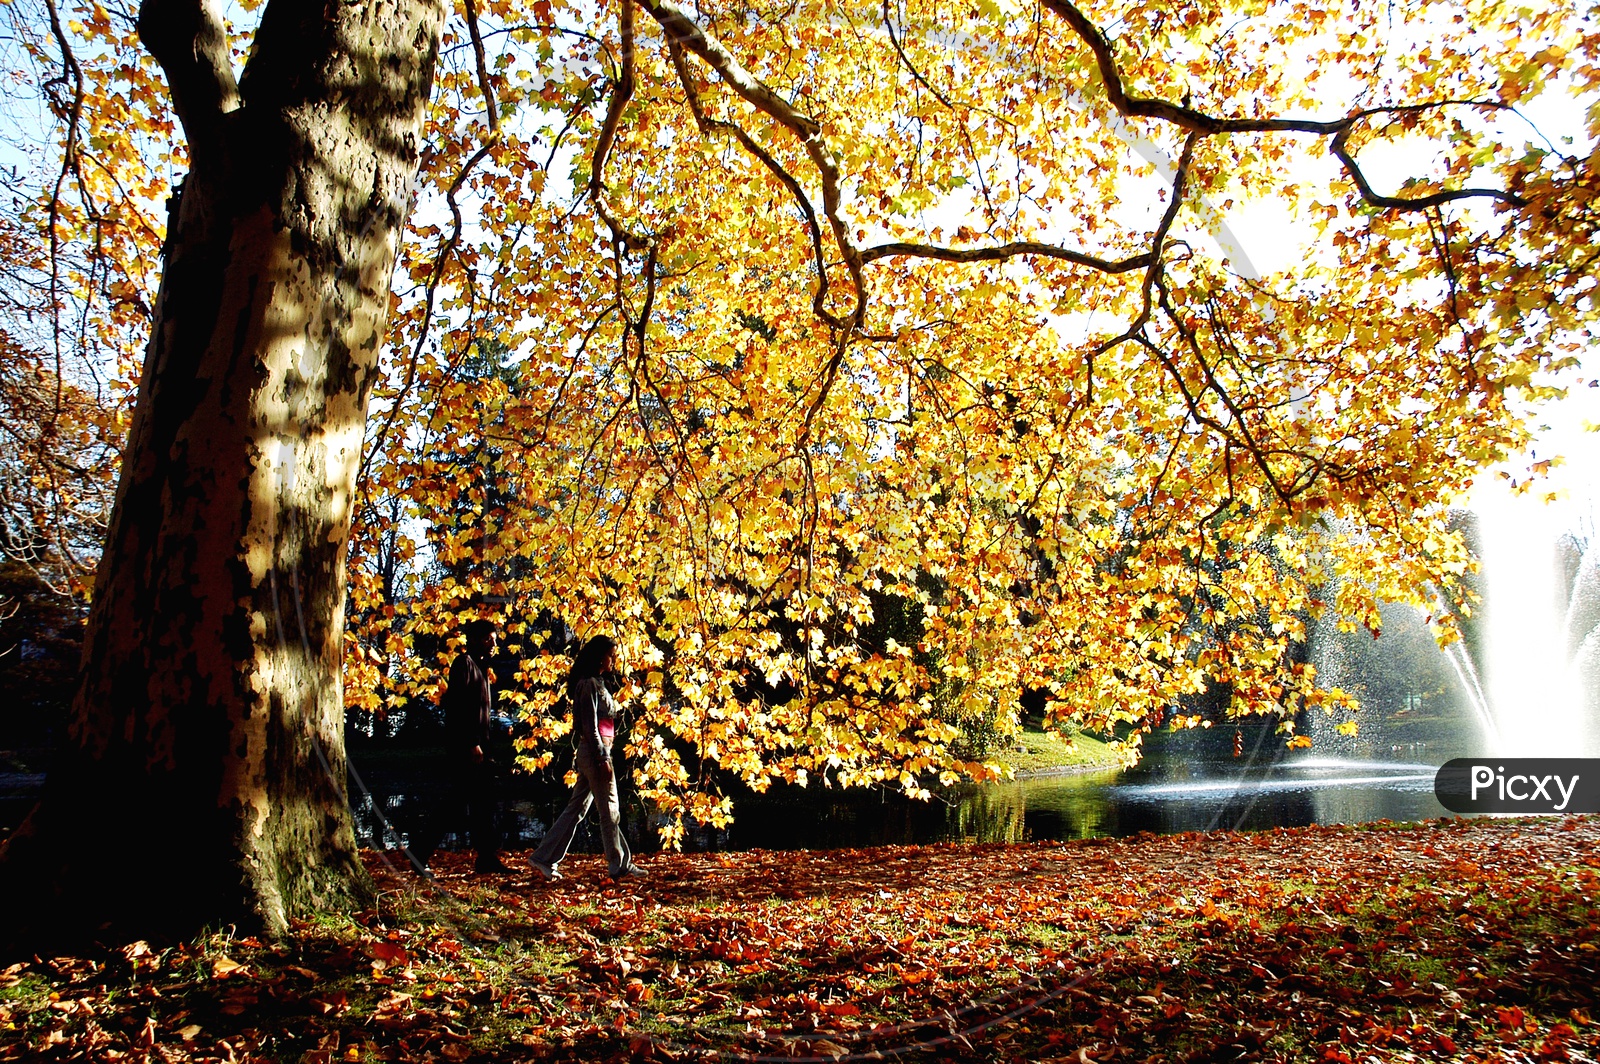 Autumn Maple Tree with yellow leaves in a park